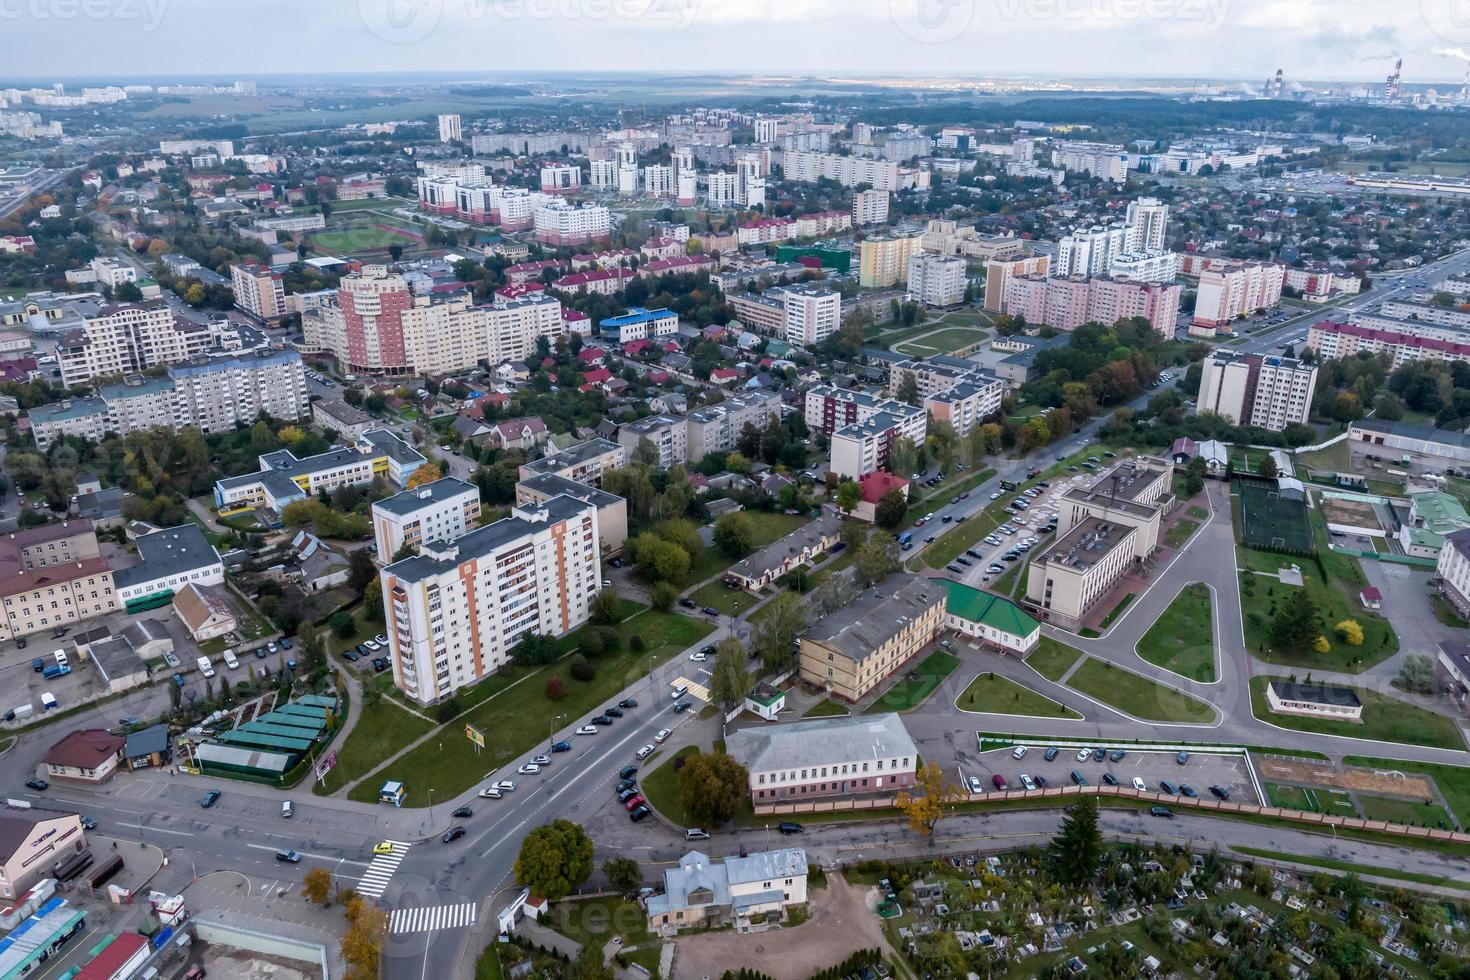 aerial panoramic view from height of a multi-storey residential complex and urban development in autumn day photo